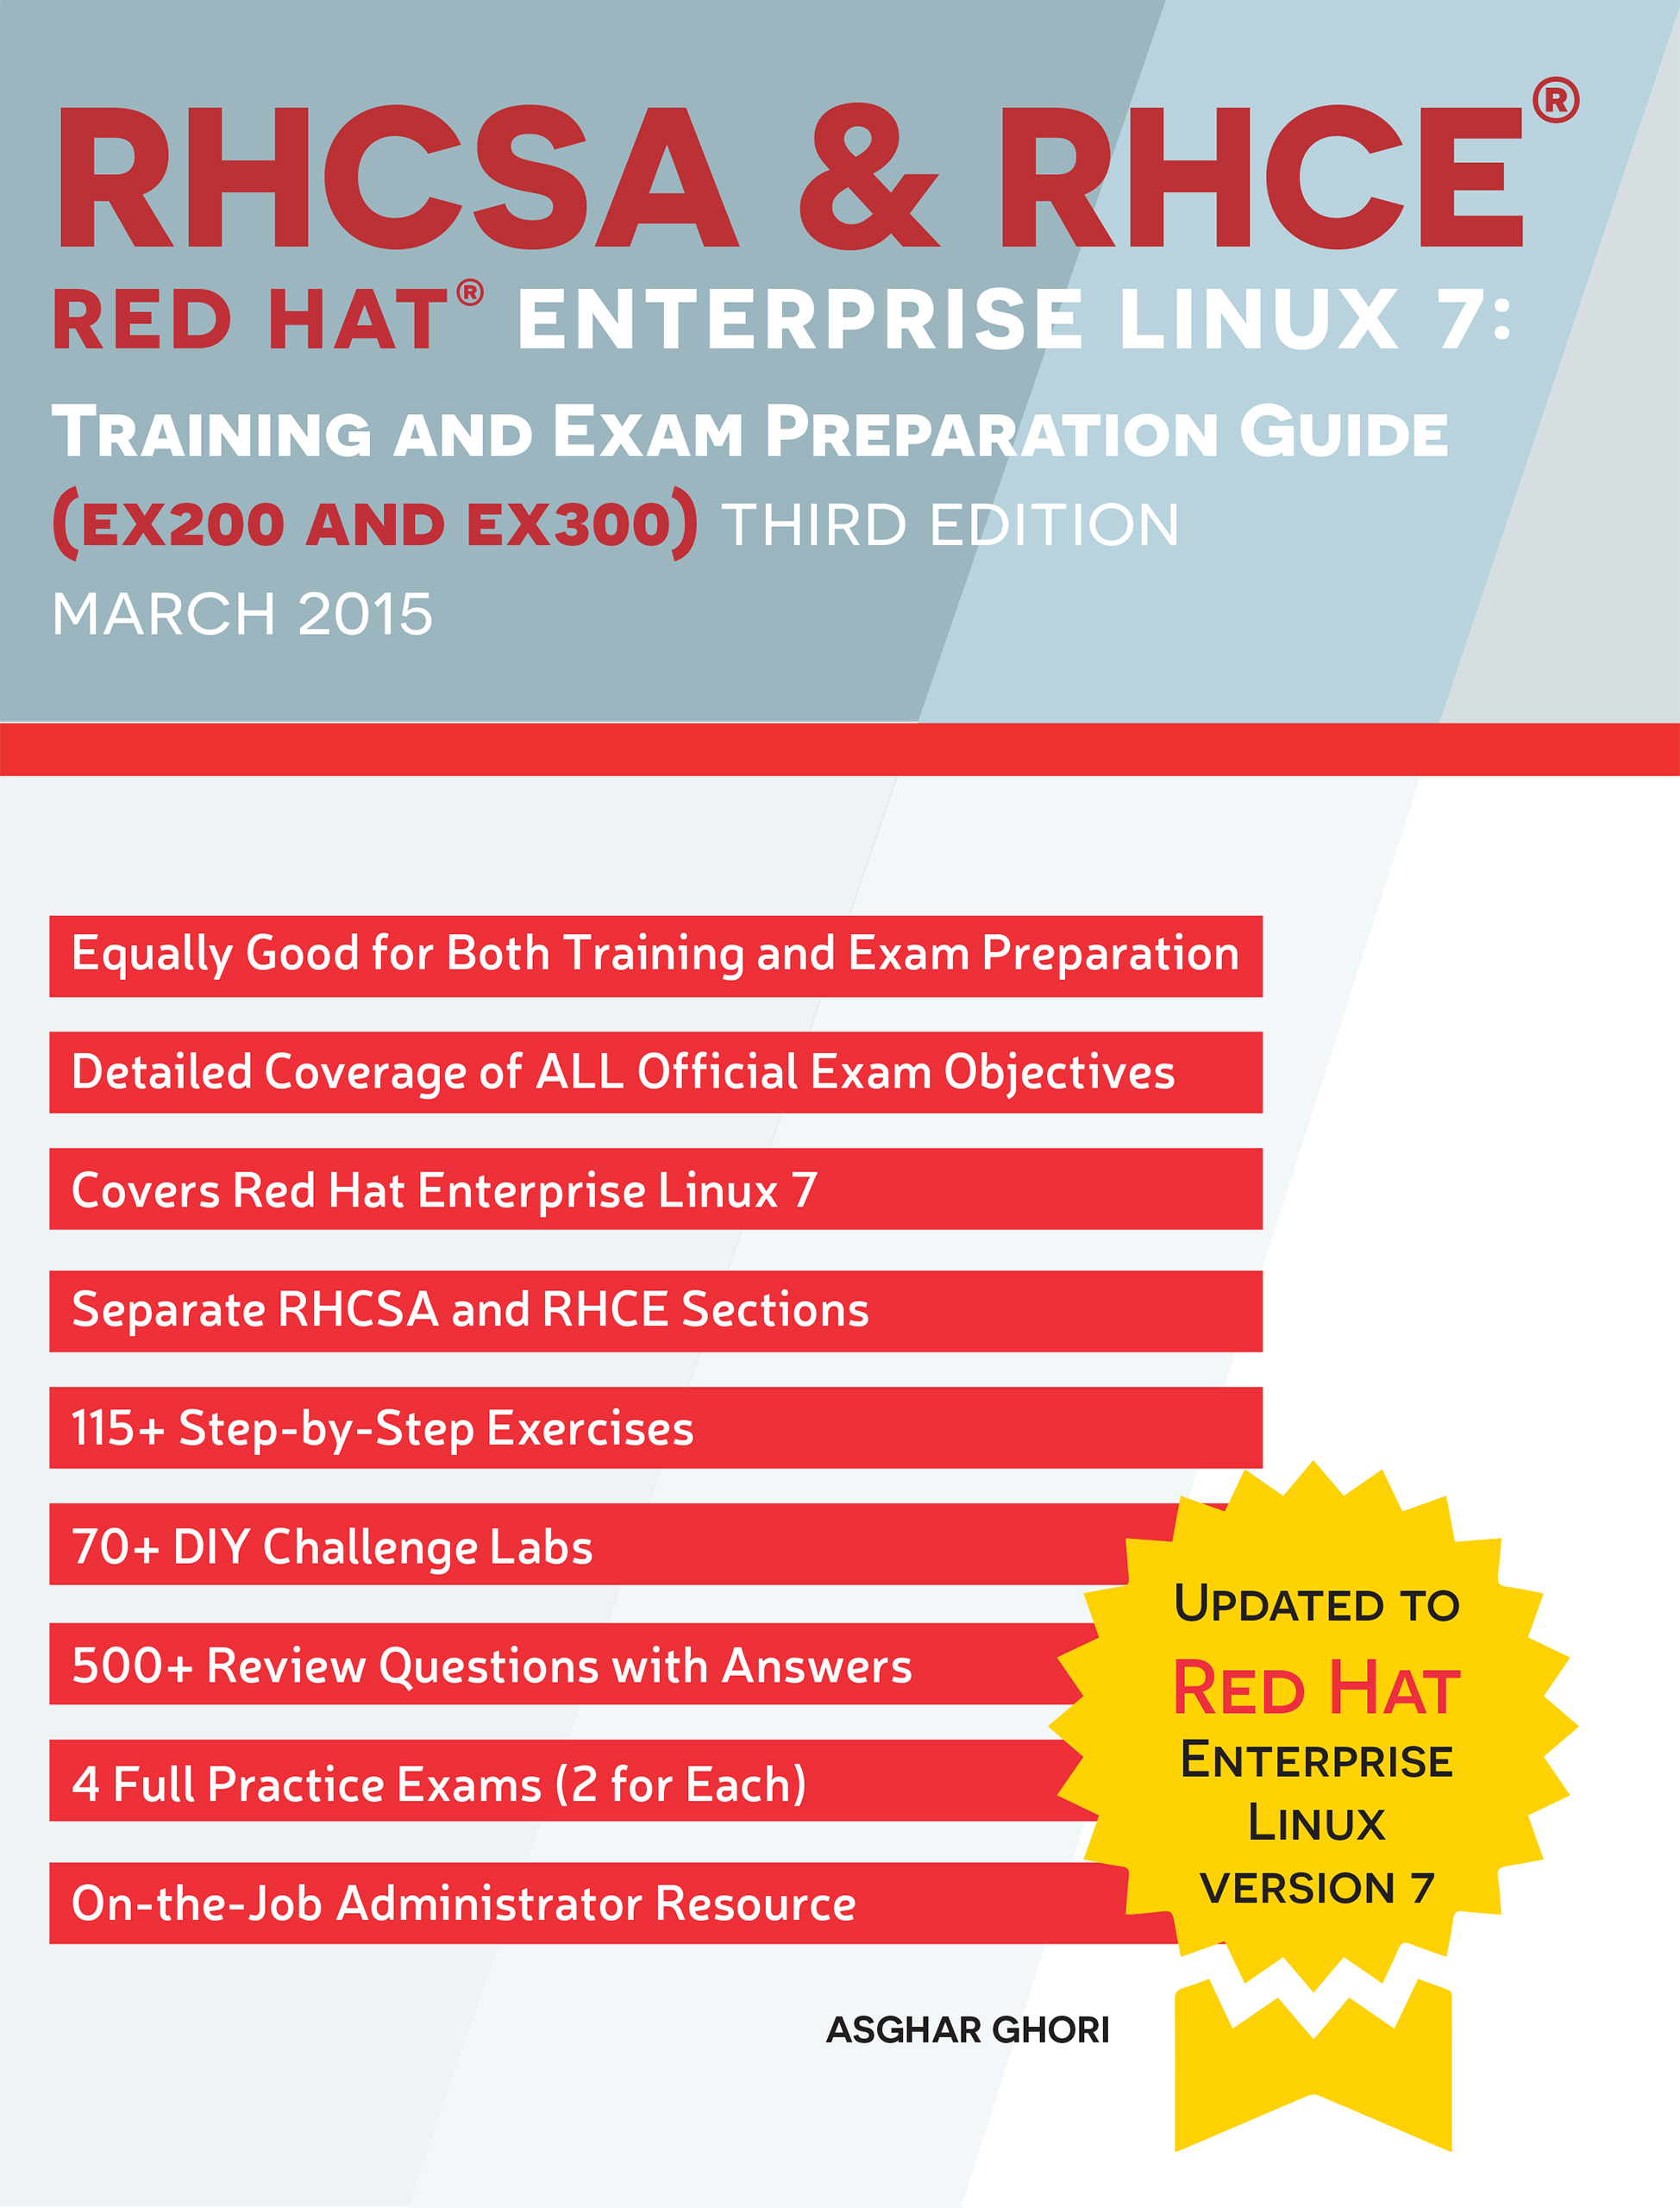 RHCSA & RHCE Red Hat Enterprise Linux 7: Training and Exam Preparation Guide (EX200 and EX300)